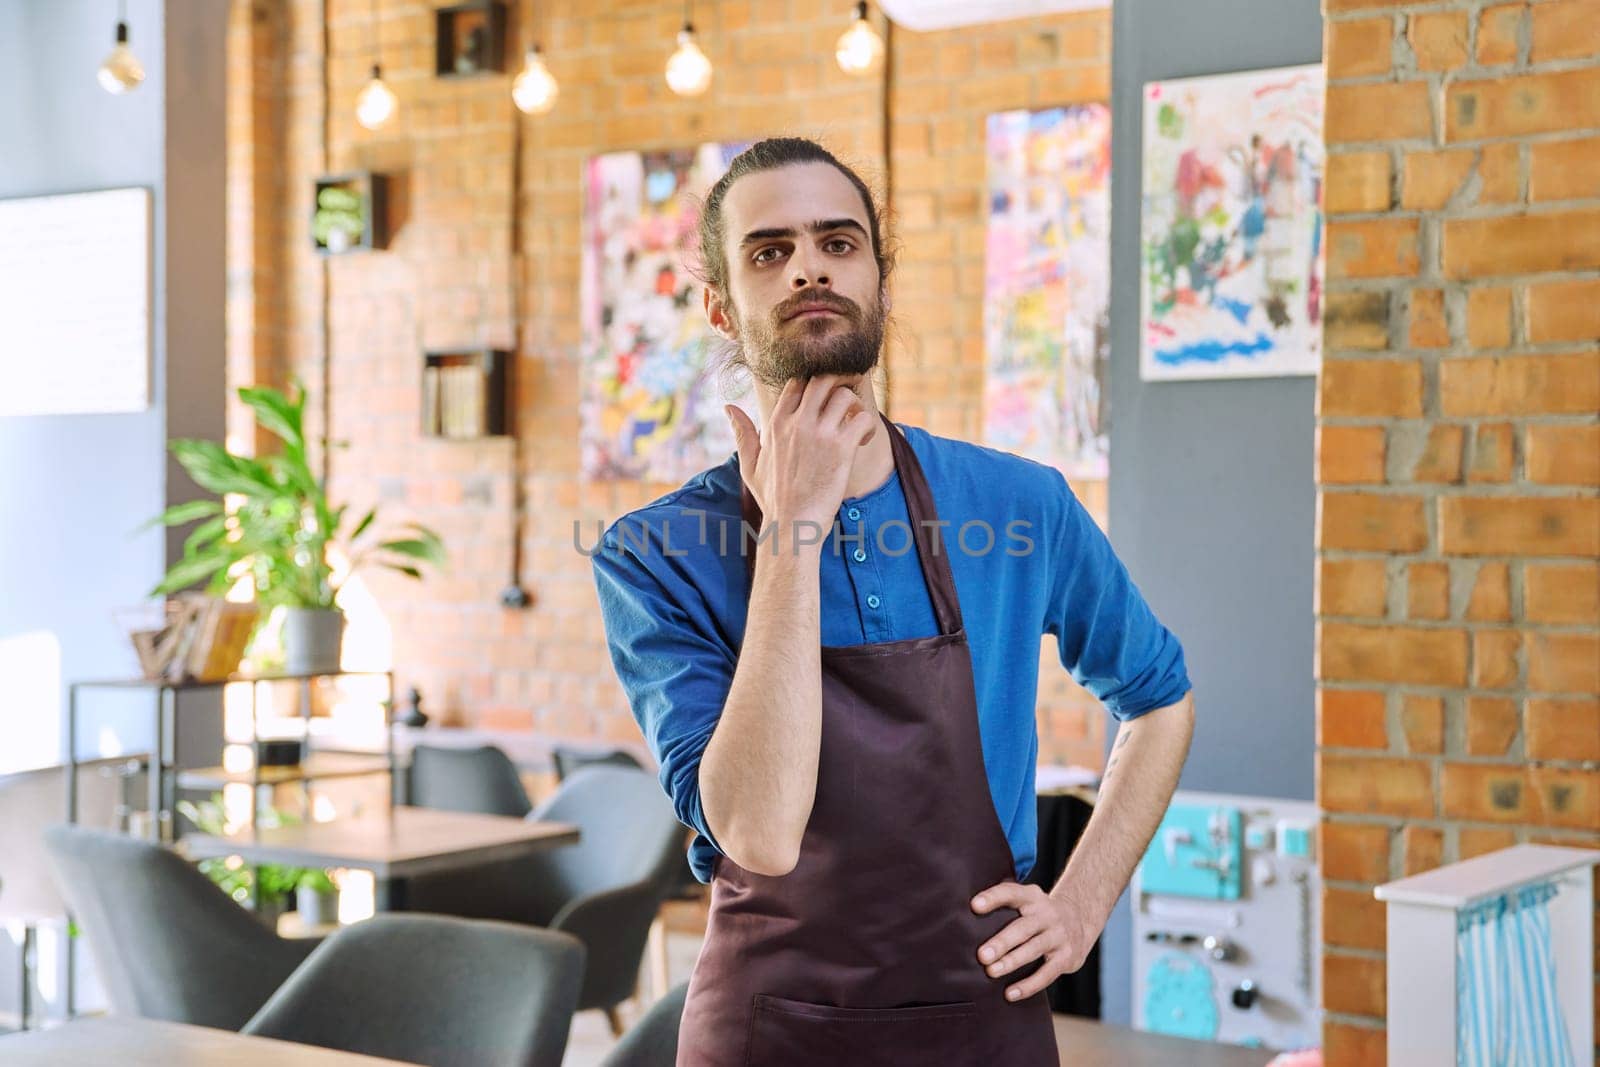 Confident successful young man service worker owner in apron posing looking at camera in restaurant cafeteria coffee pastry shop interior. Small business staff occupation entrepreneur work